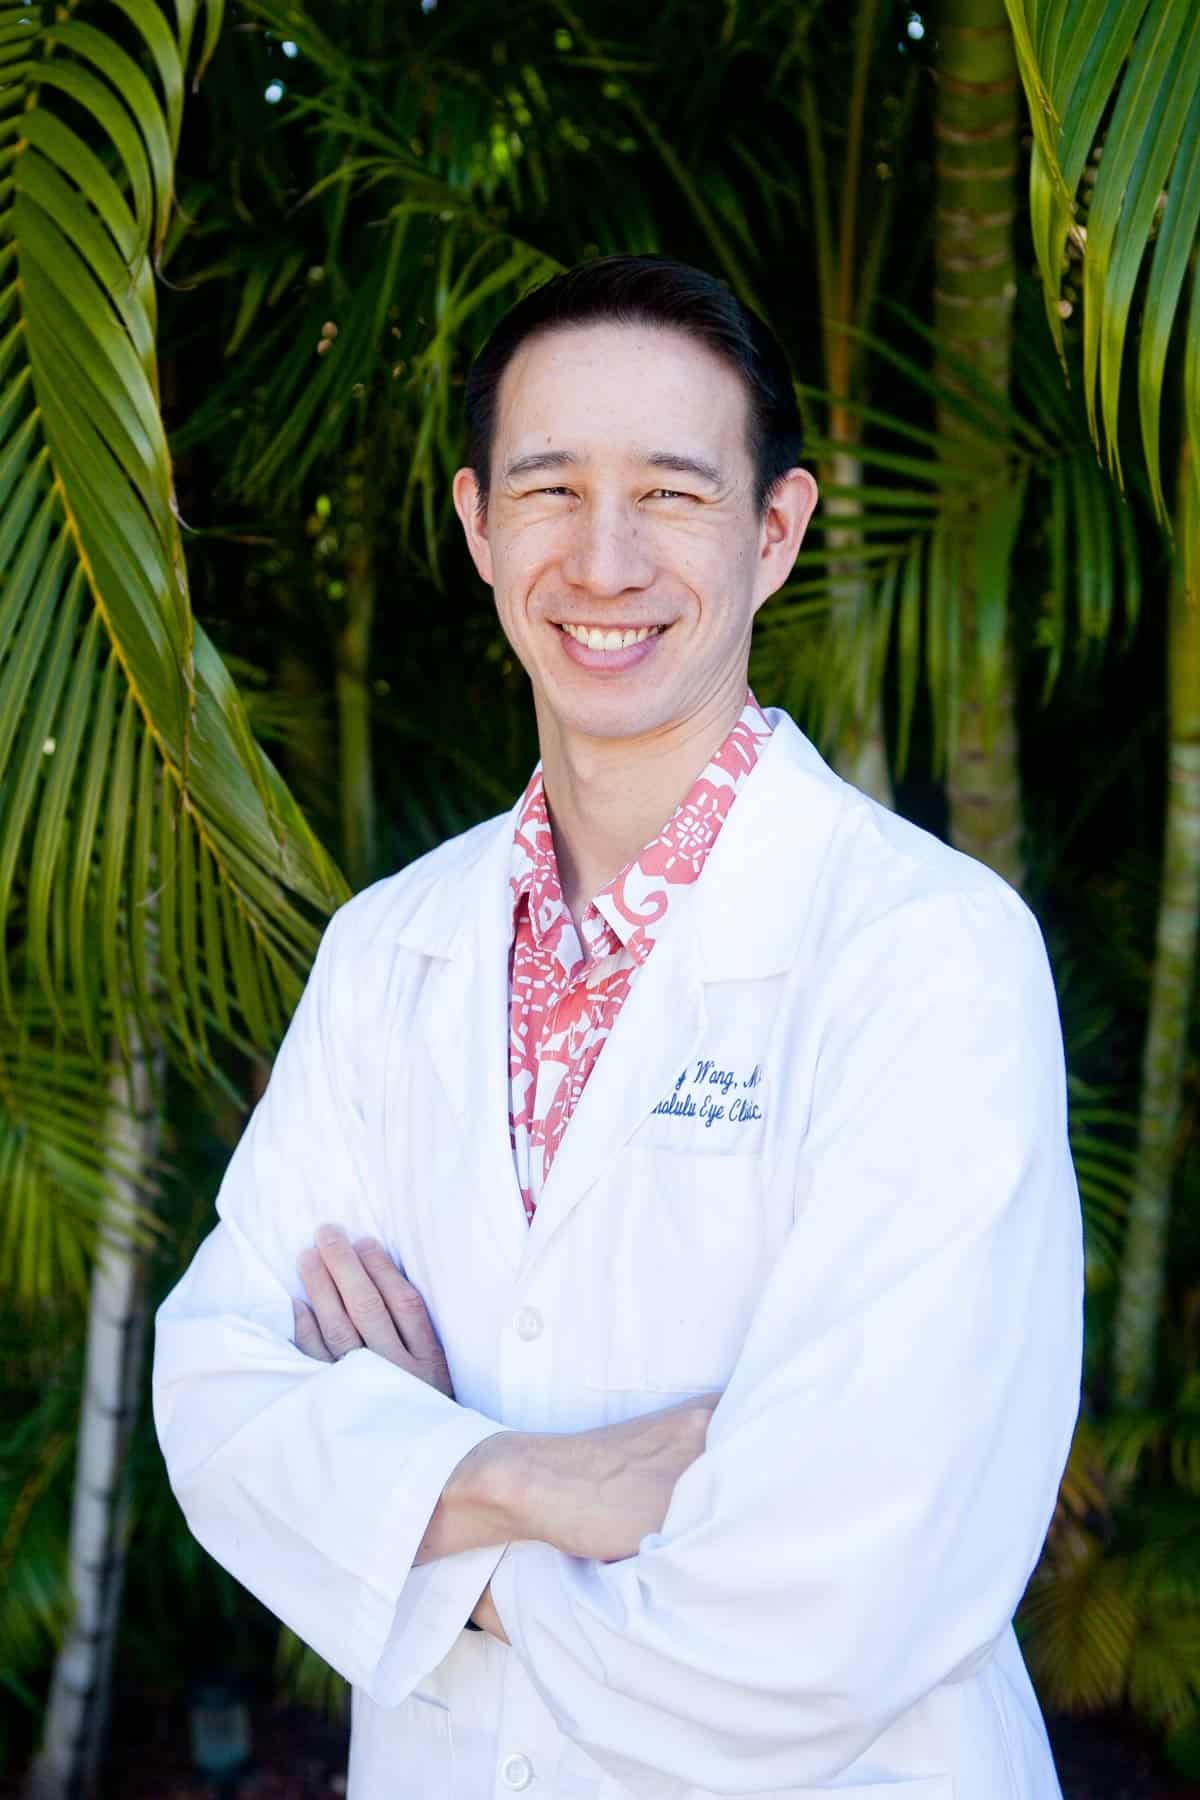 Jeffrey Wong cataract surgeon smiling in tropical background of Hawaii